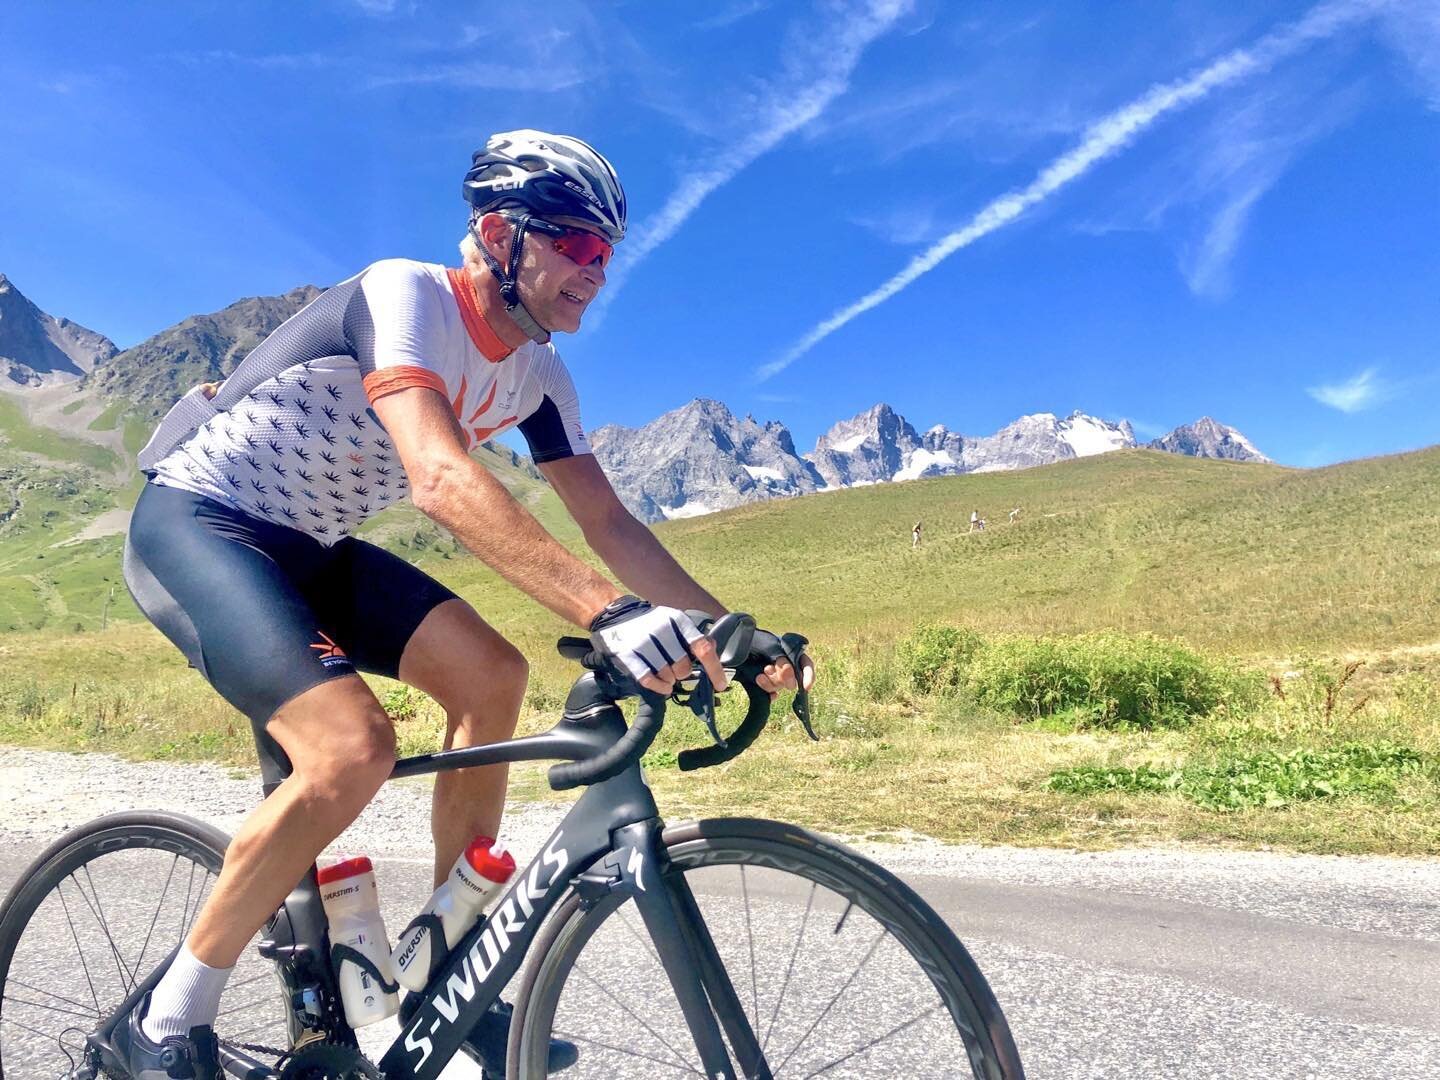 Why I train (#5): to be able to reach beautiful places (Col du Galibier in this case). And you, why do you train?